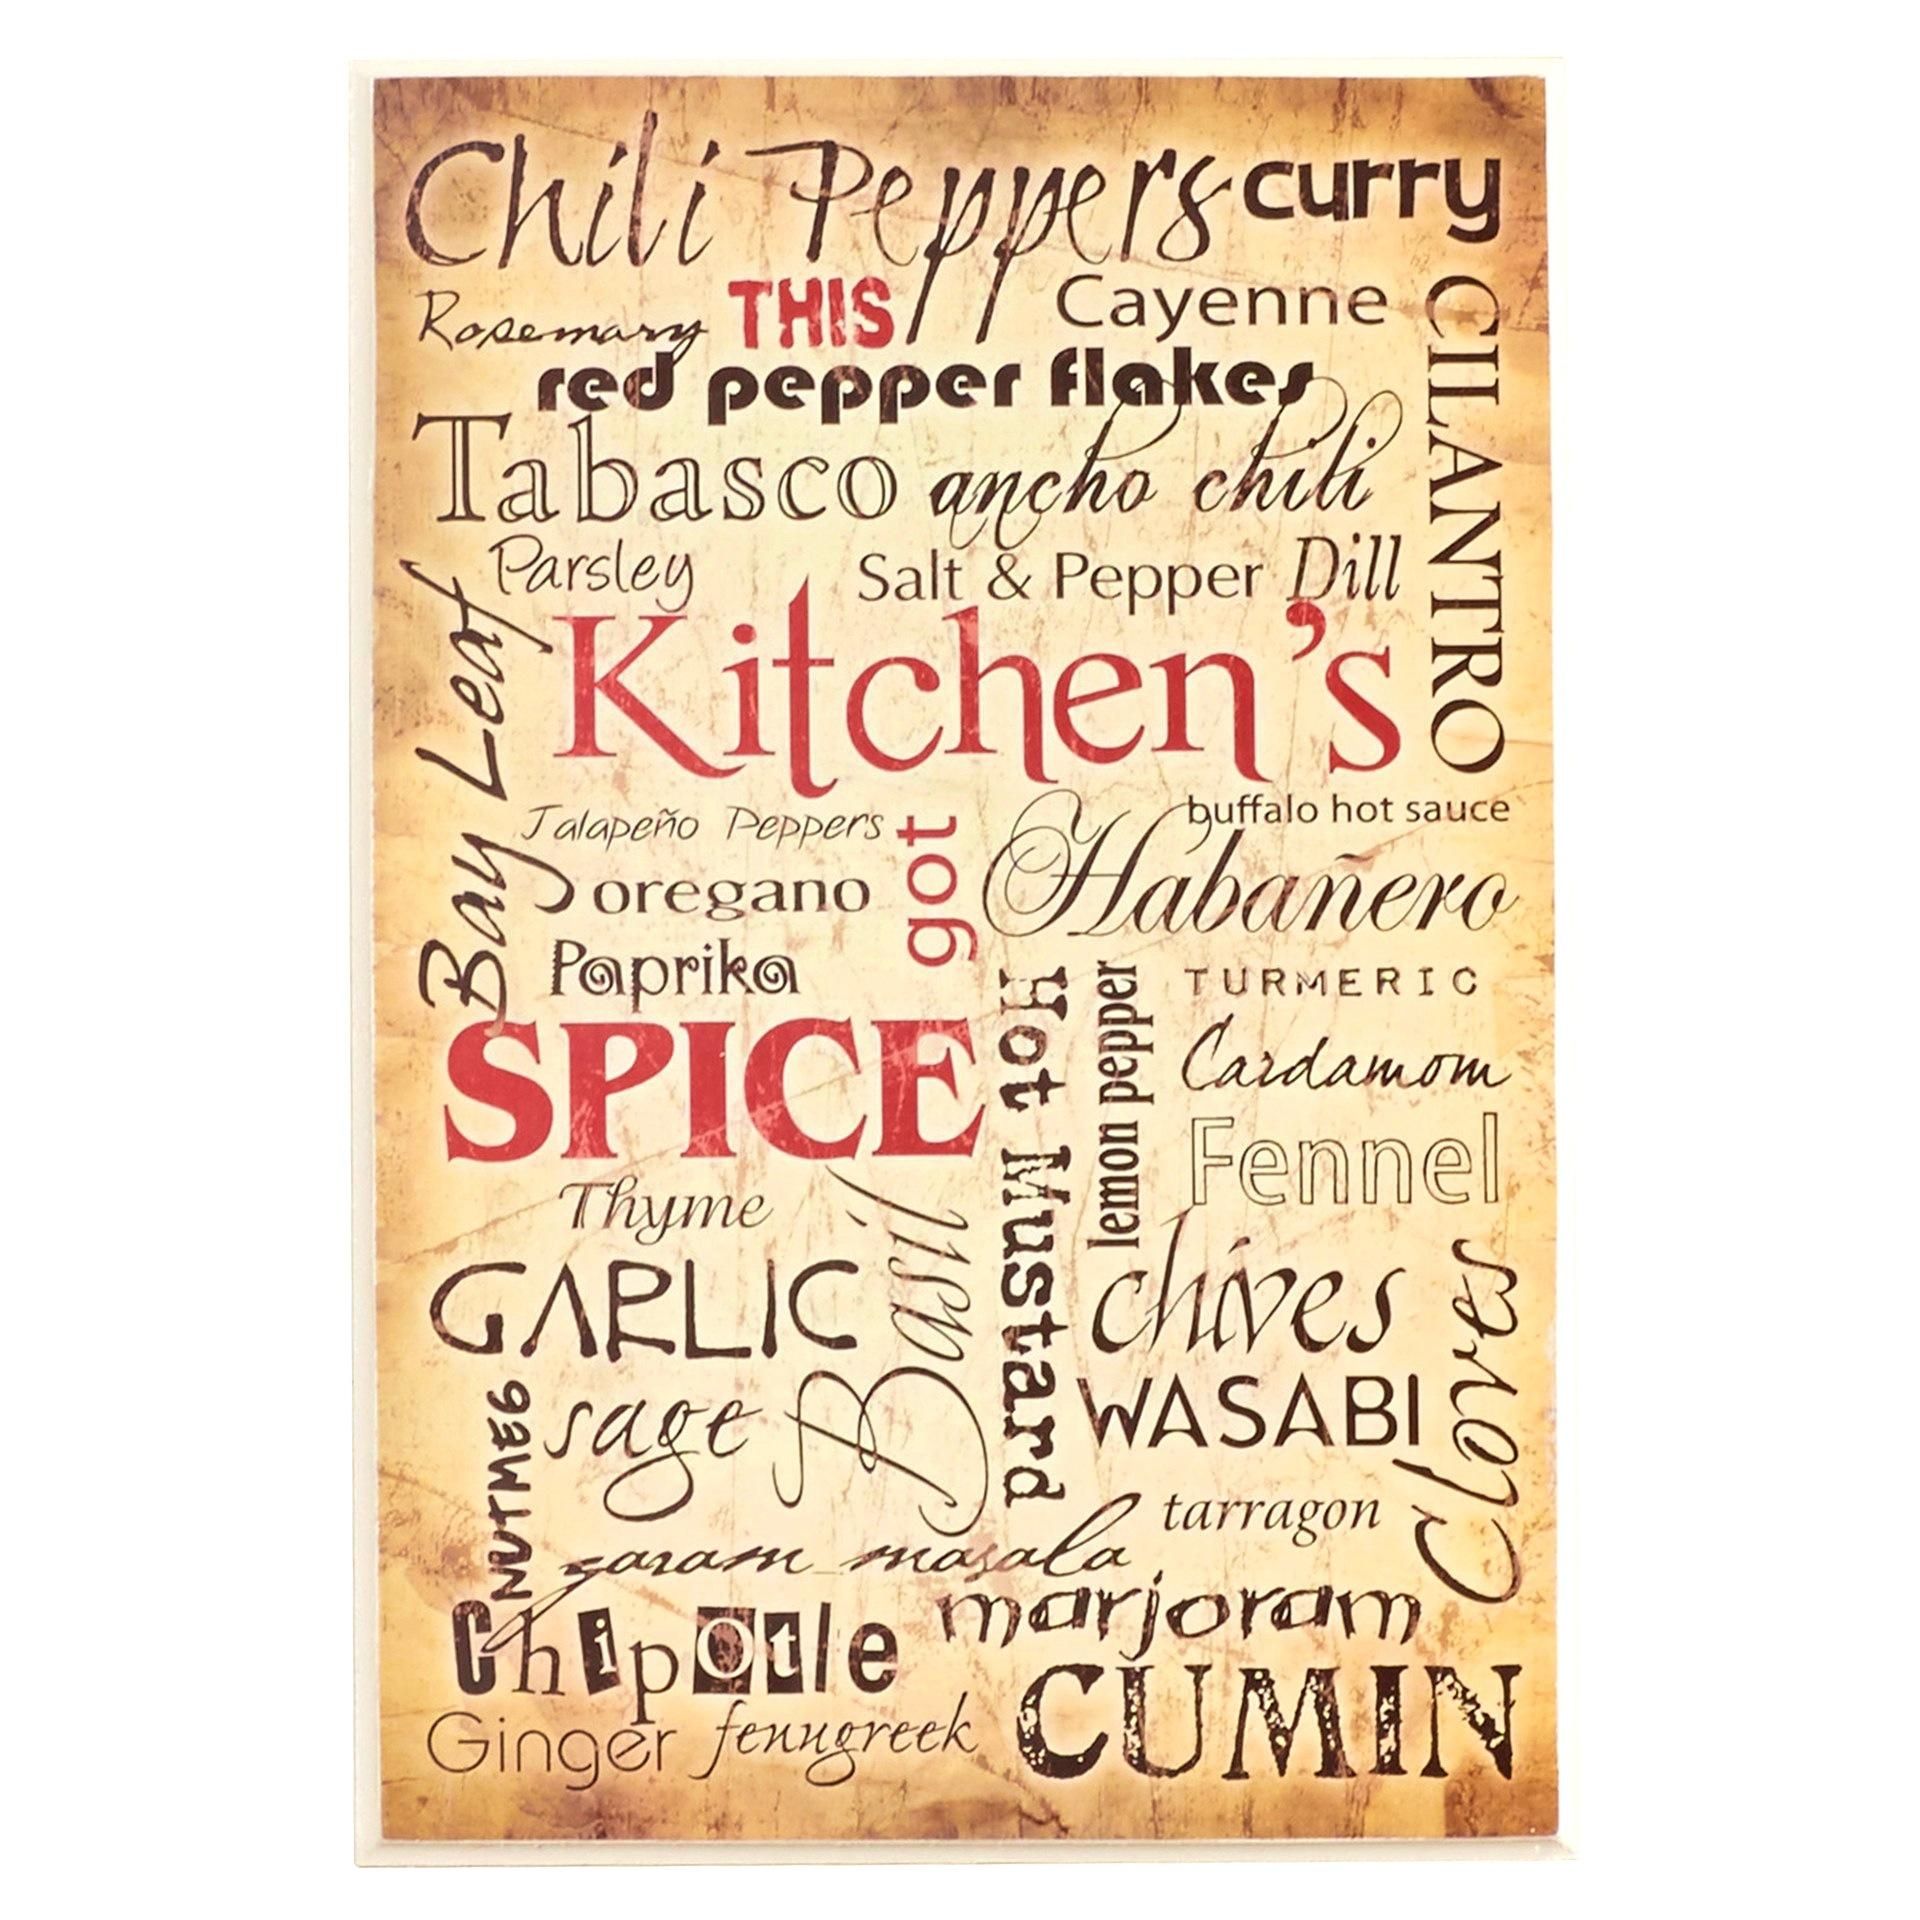 Furniture : Heavenly Kitchen And Spice Textual Art Plaque Italian Pertaining To Italian Wall Art Quotes (View 16 of 20)